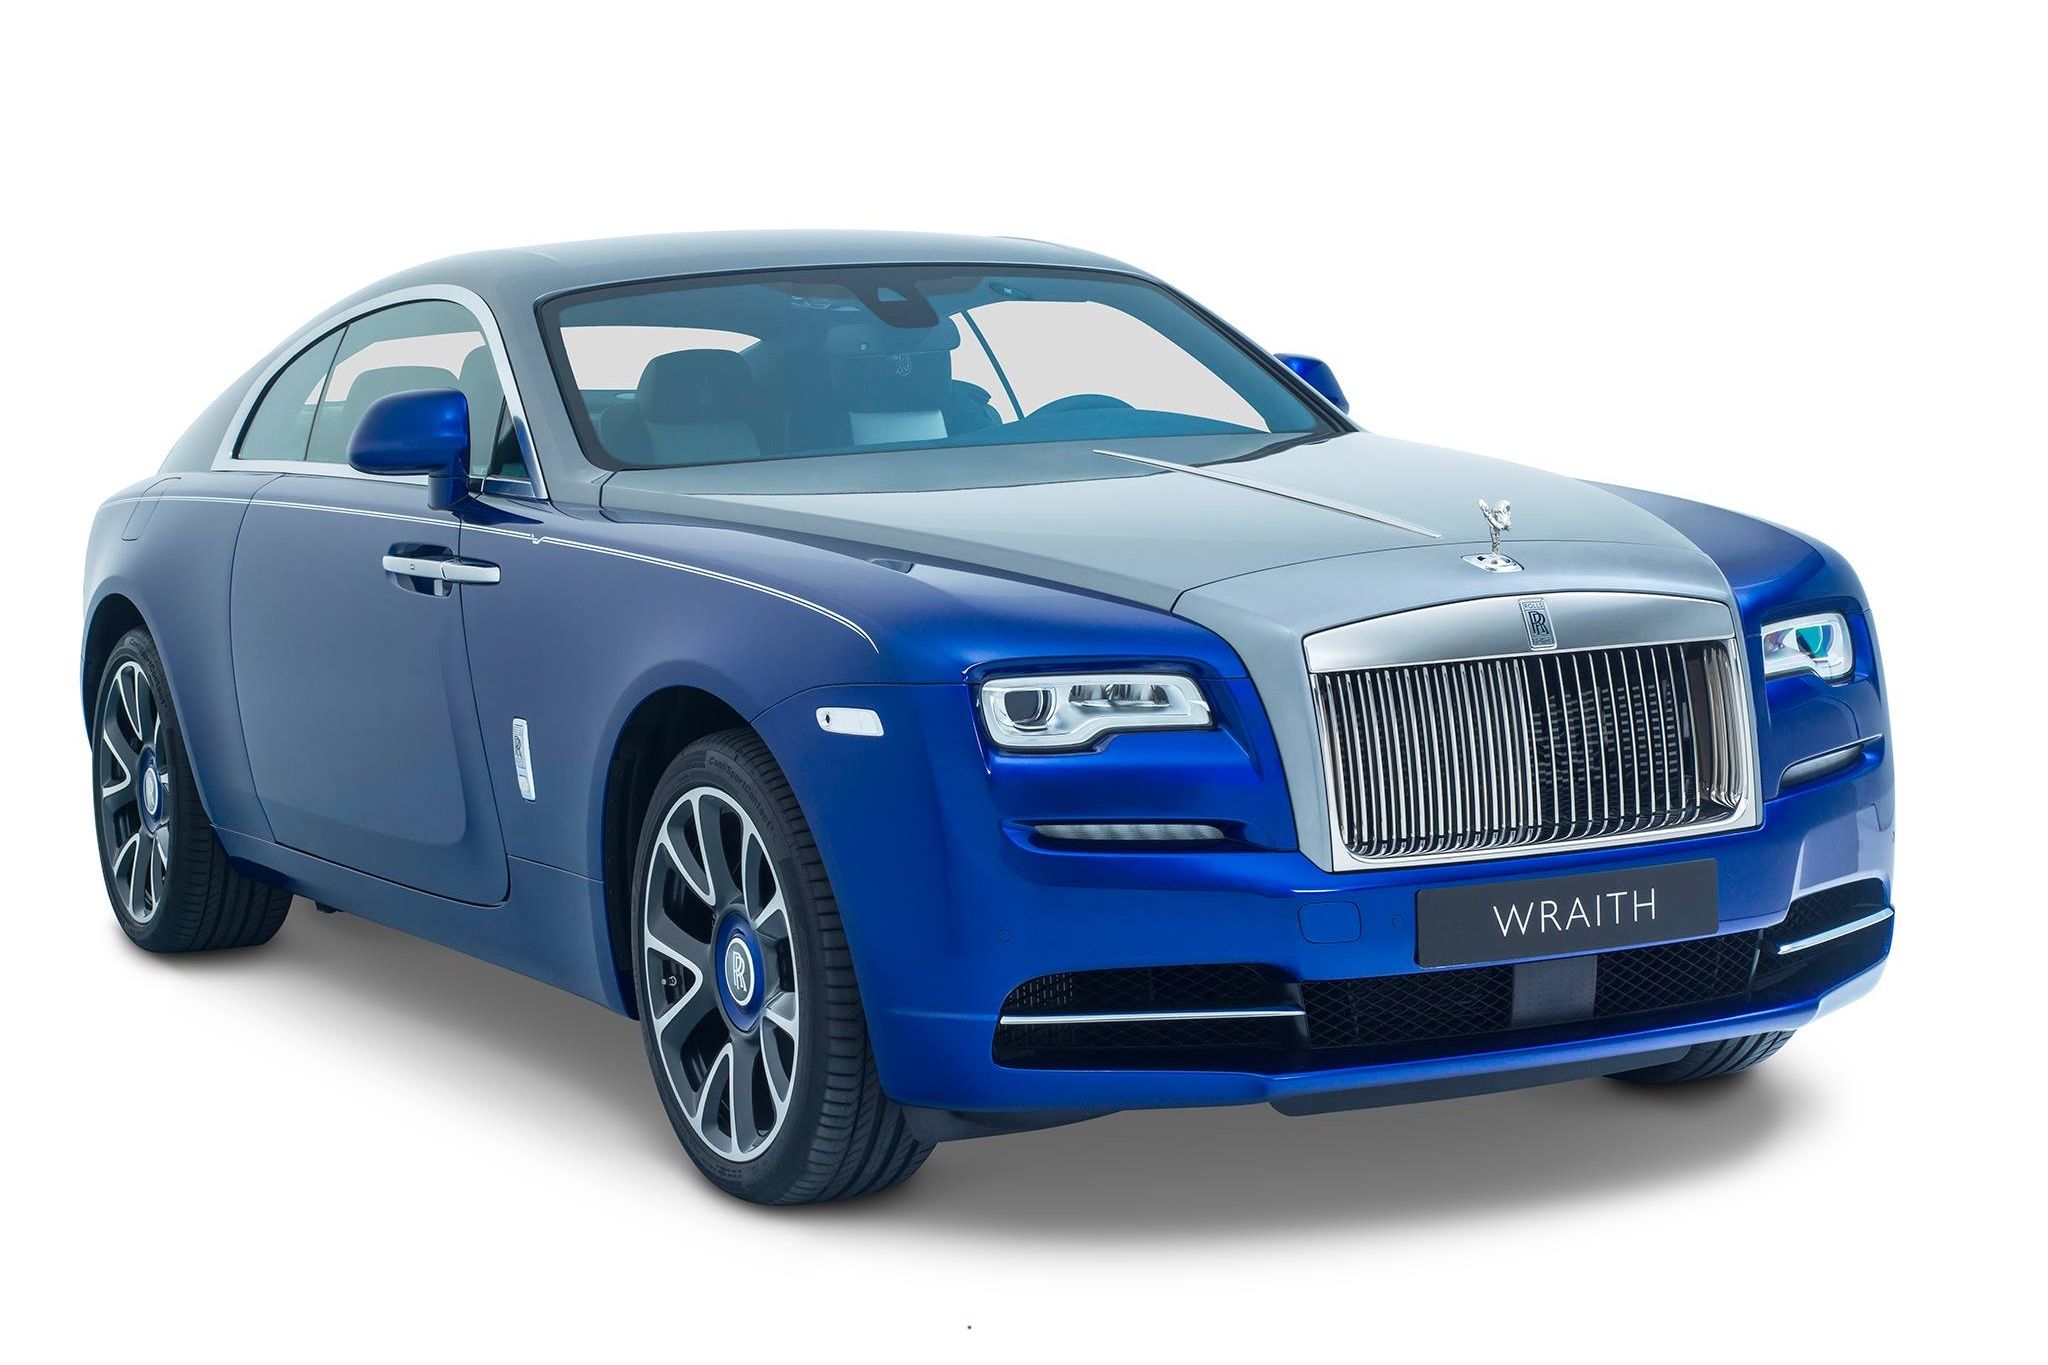 Rolls-Royce Wraith: These are the last copies of the luxury coupé